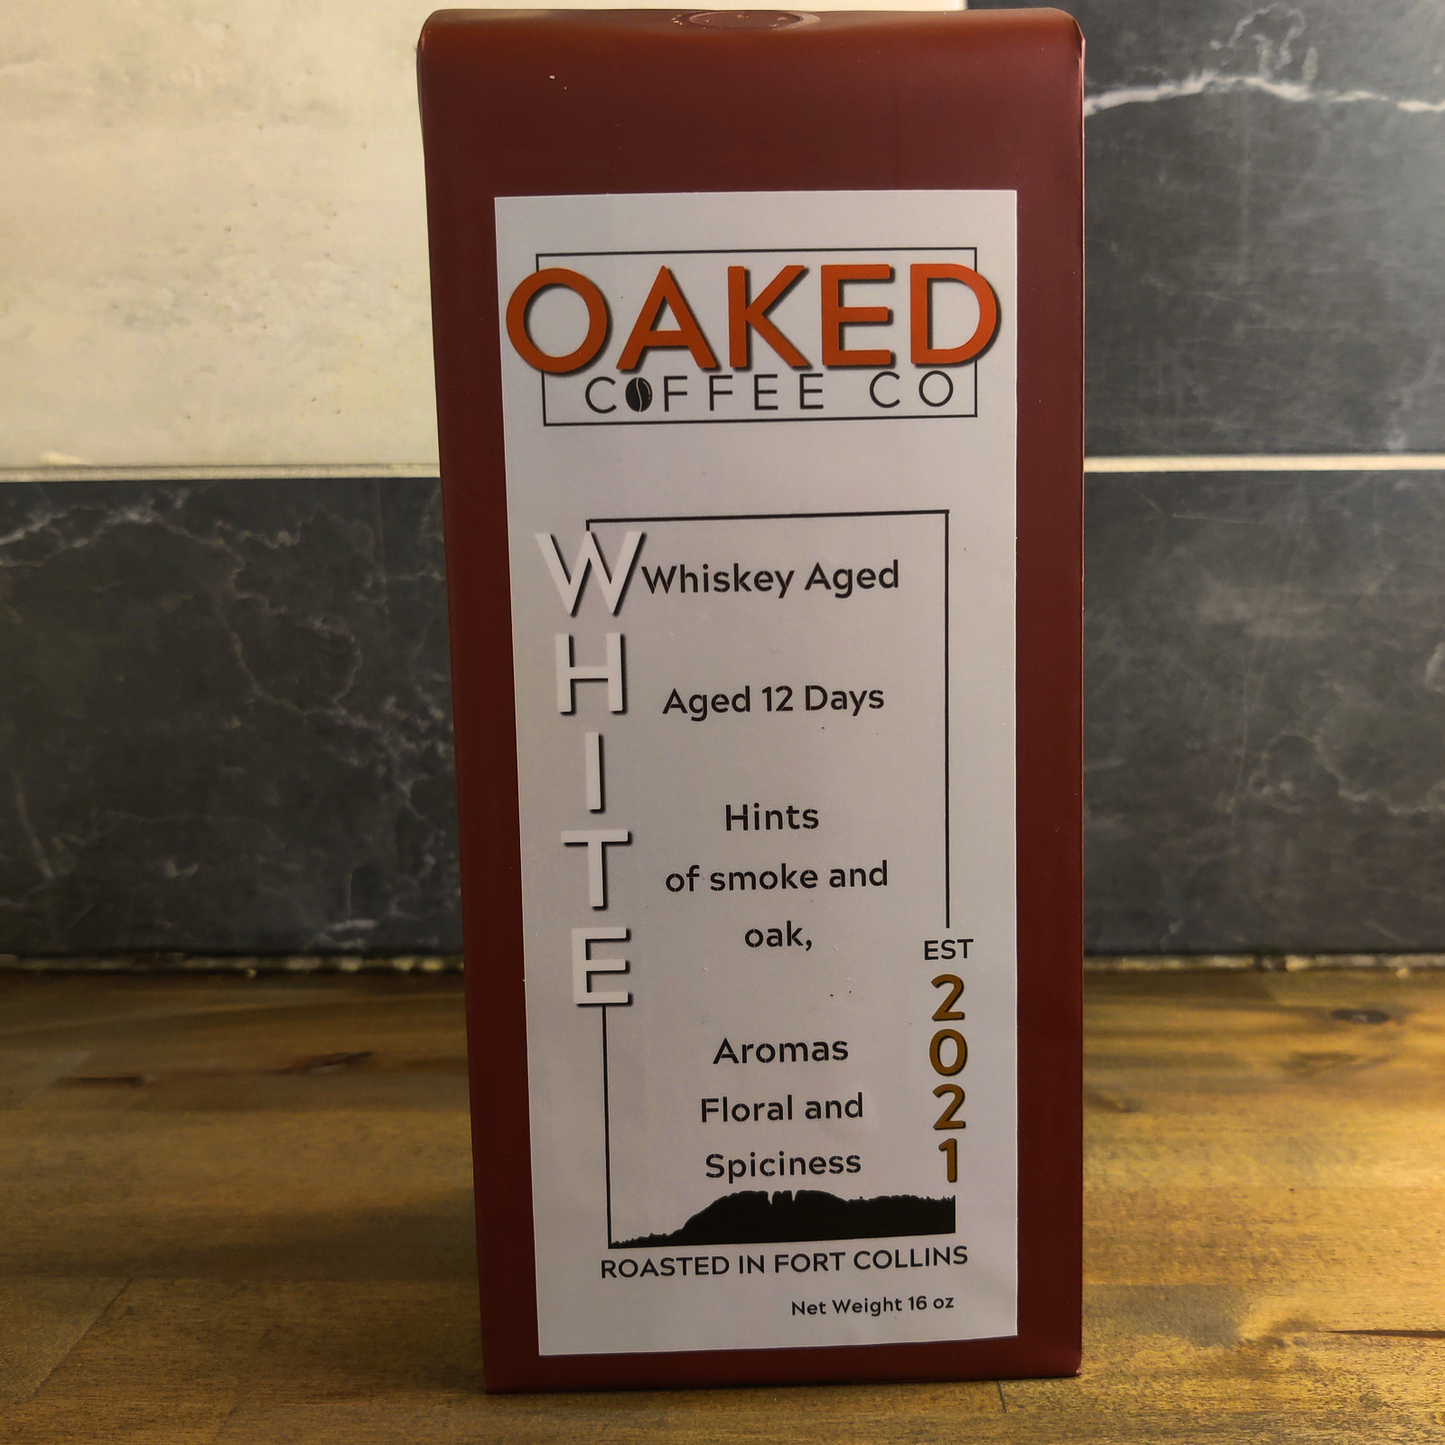 Oaked Coffee Co